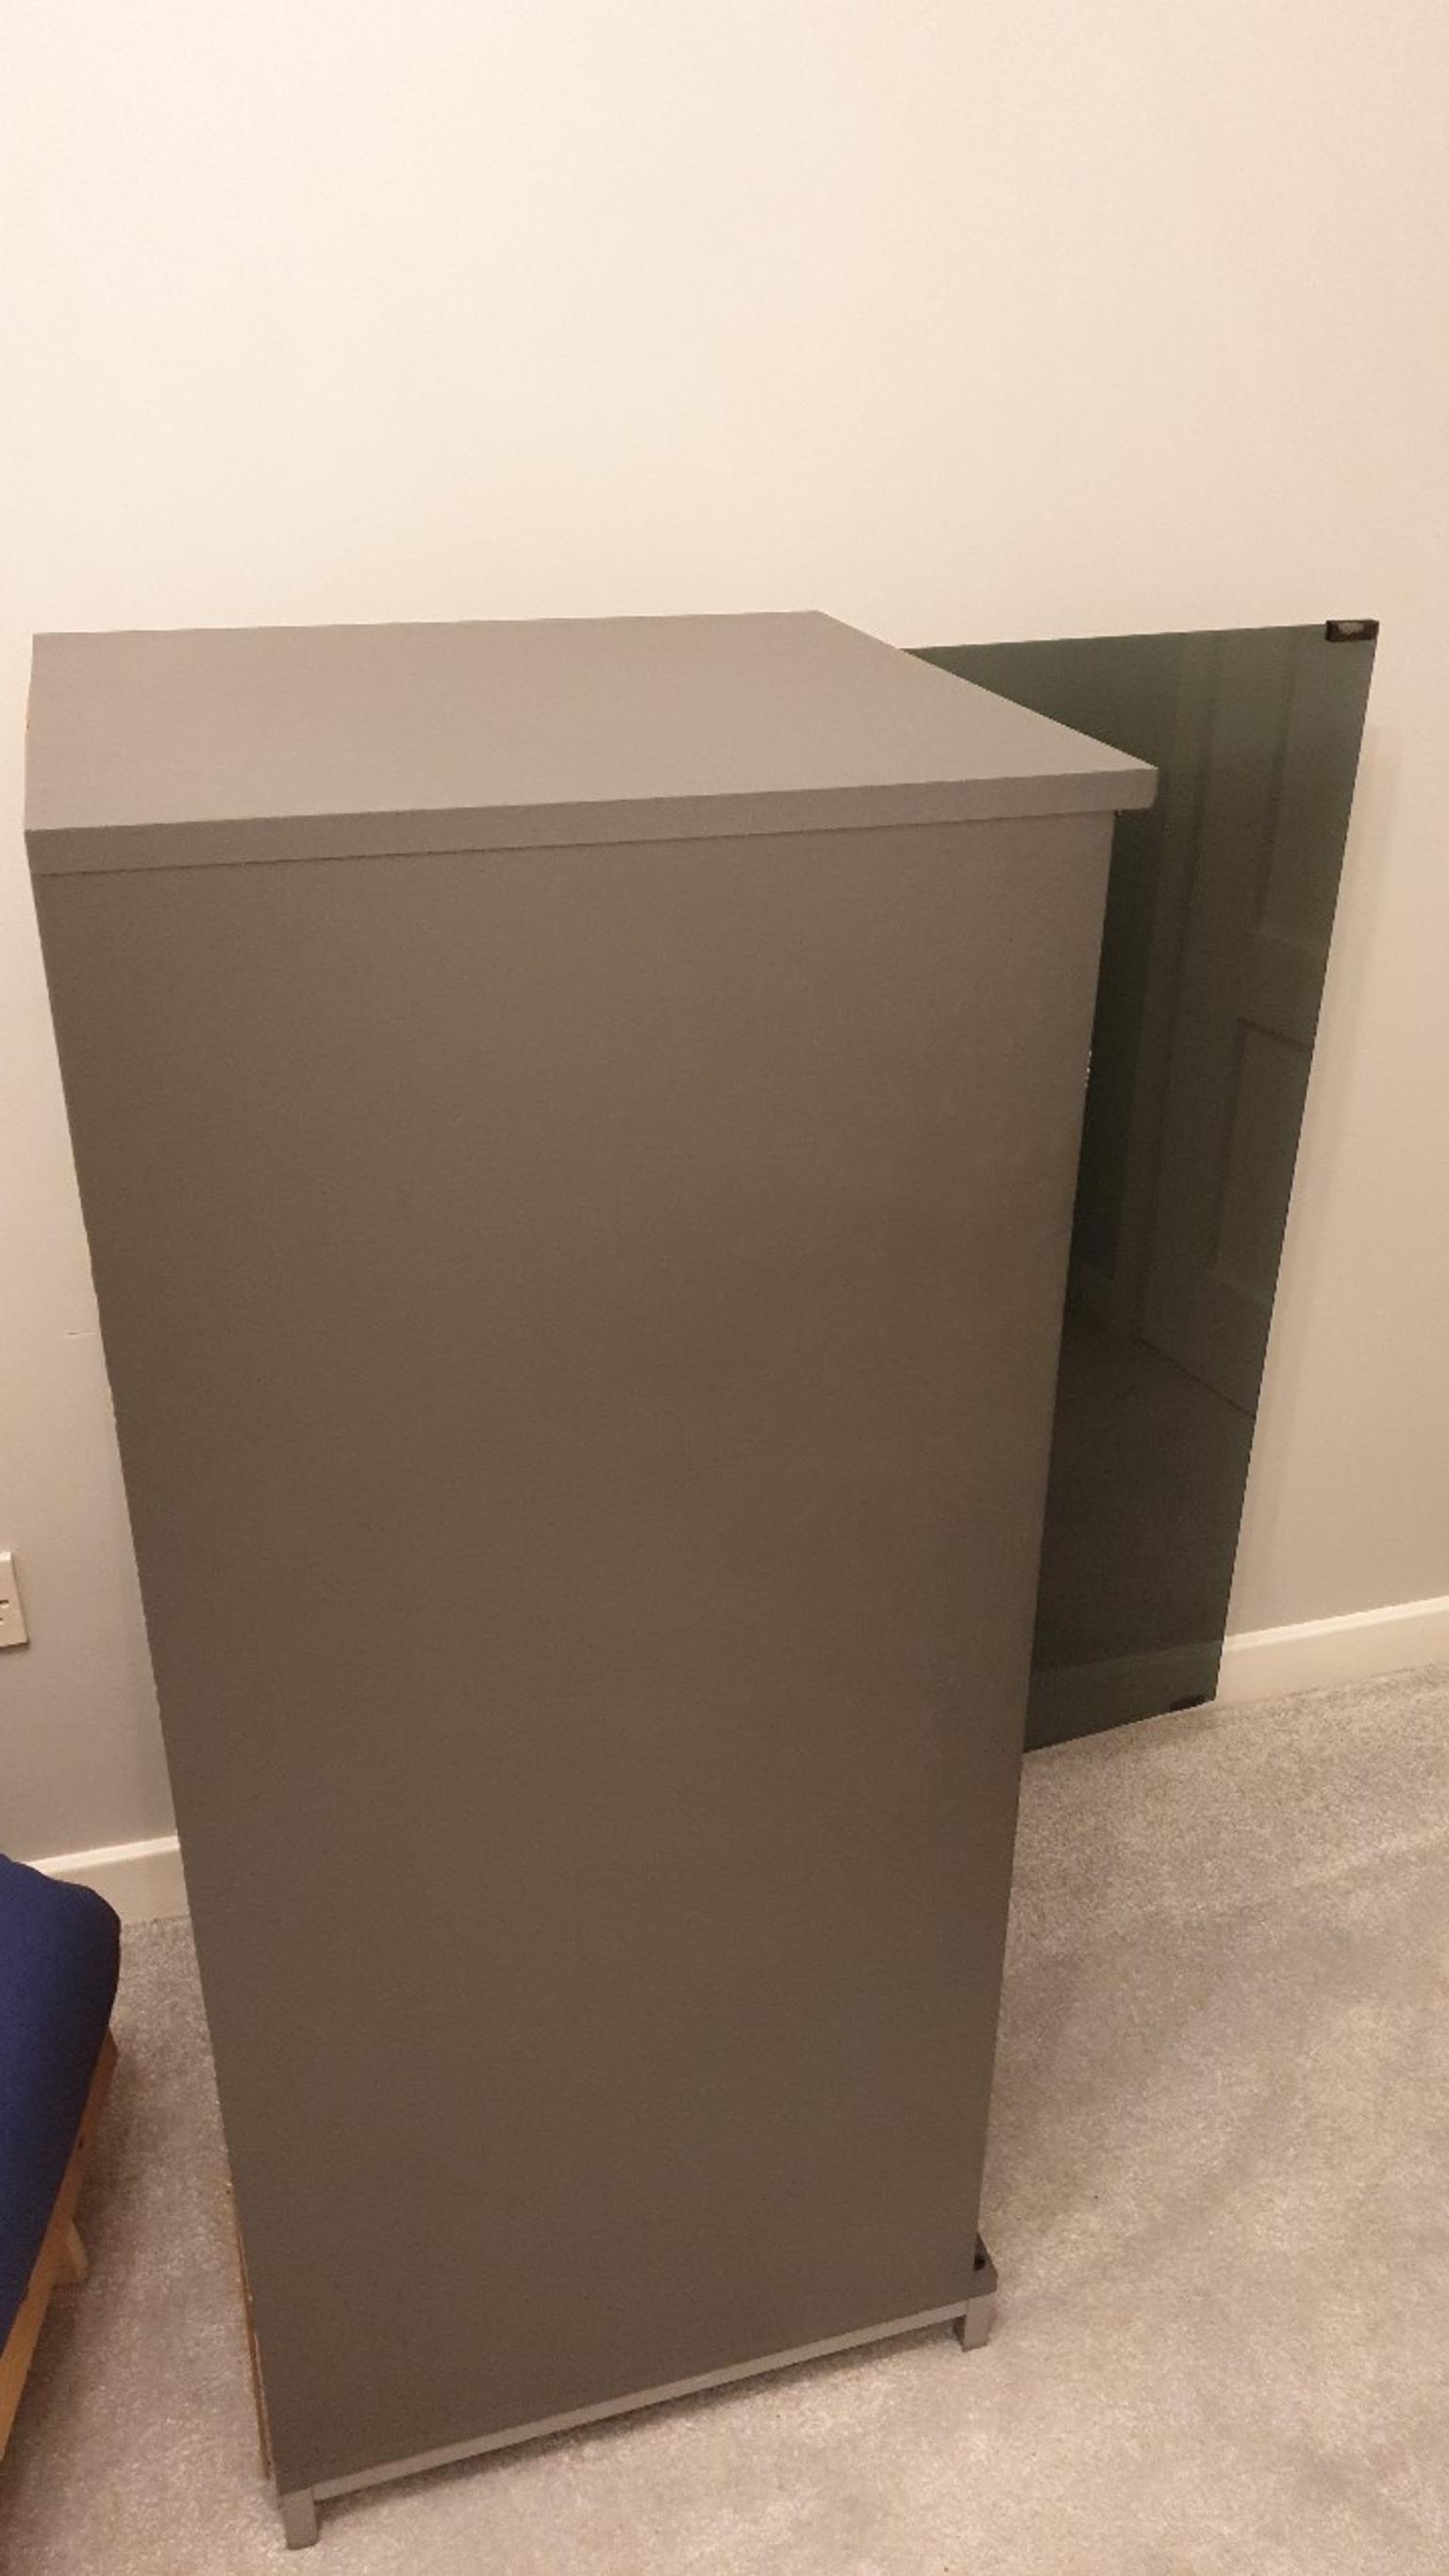 Glass Door Storage Cabinet In Sk8 Stockport For 30 00 For Sale